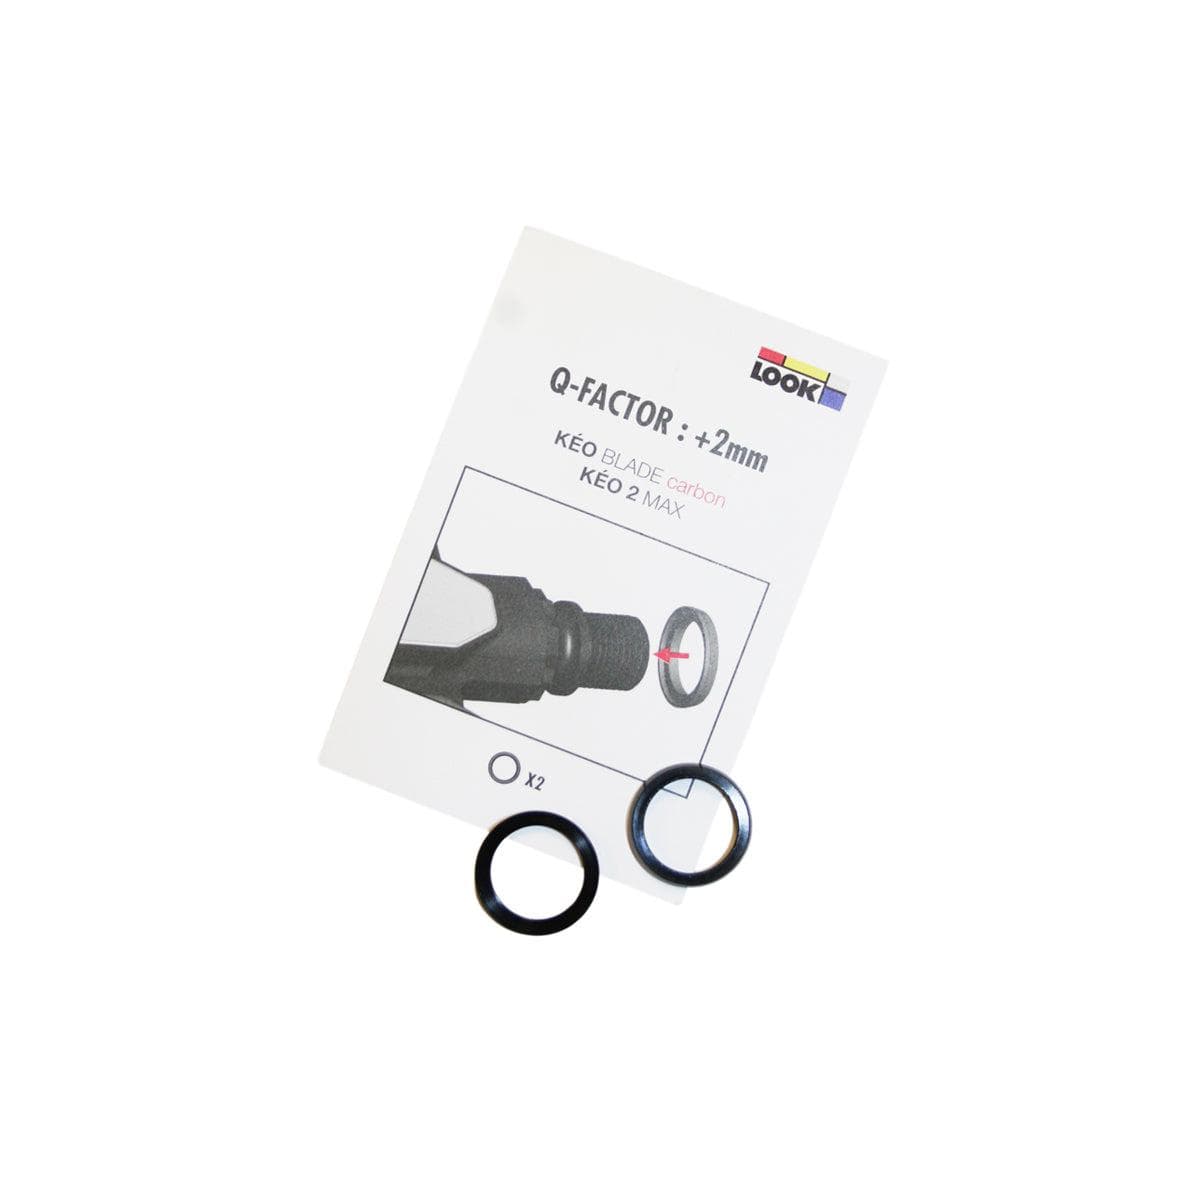 Look Spare - Adjustable Q-Factor Washer Fits Keo 2 Max/Keo Blade (From 53 To 55Mm Q-Factor):